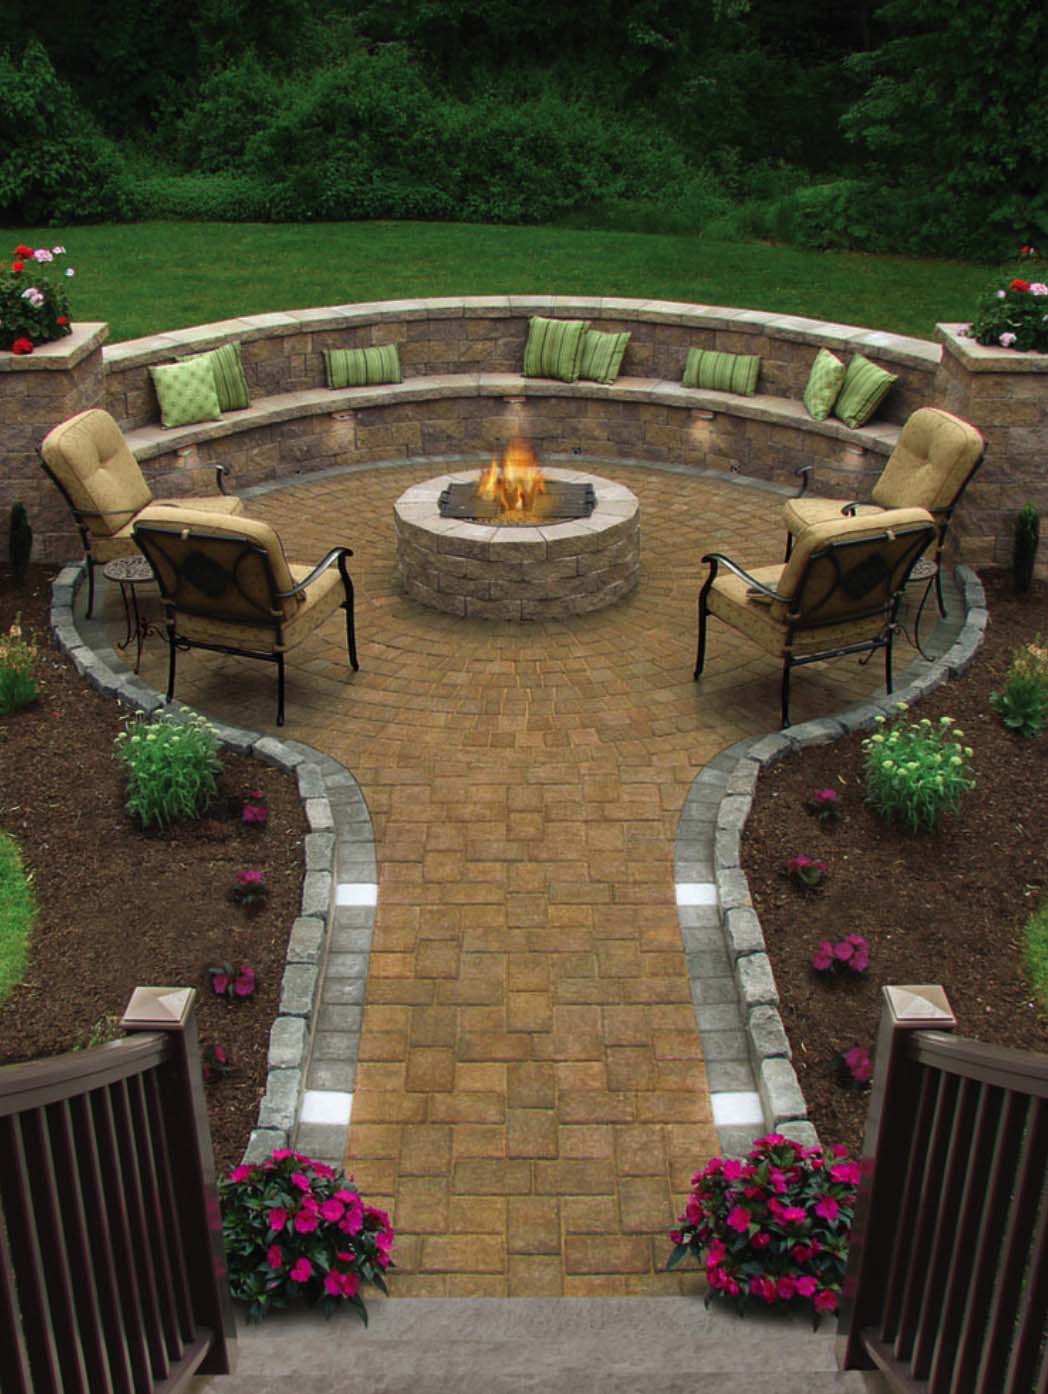 44 traditional outdoor patio designs to capture your imagination VITLMHK